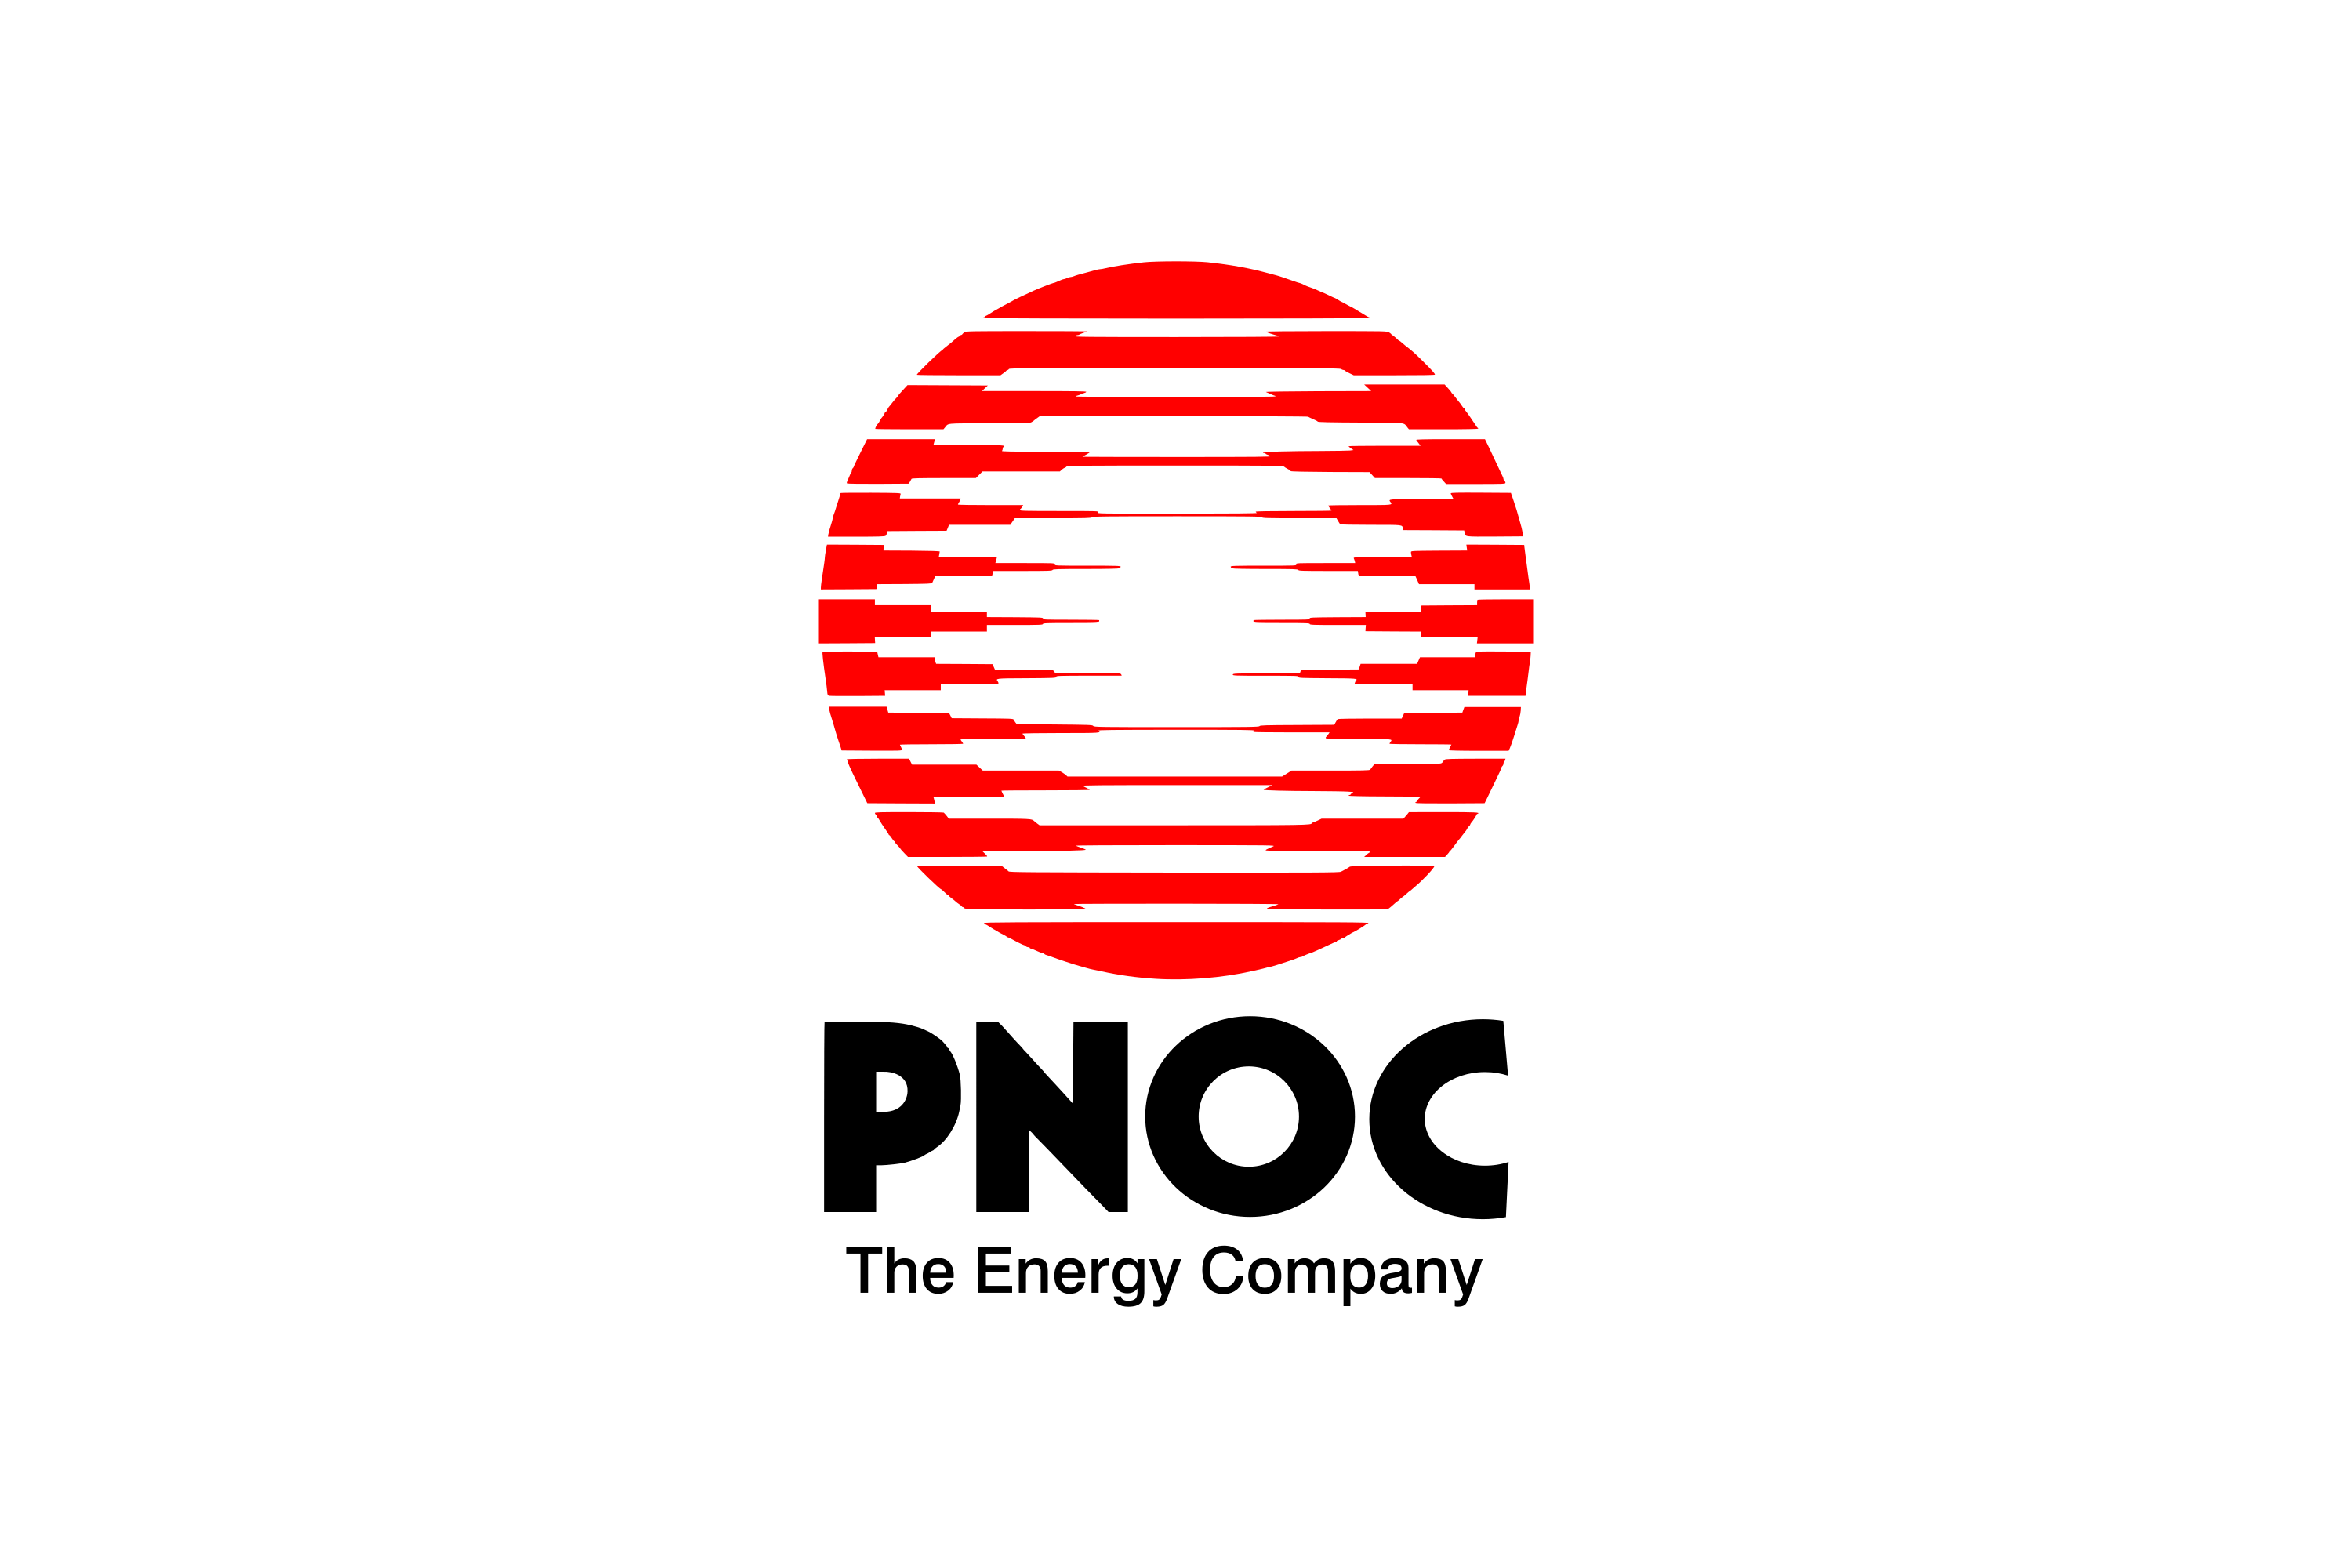 Download Philippine National Oil Company Logo in SVG Vector or PNG File